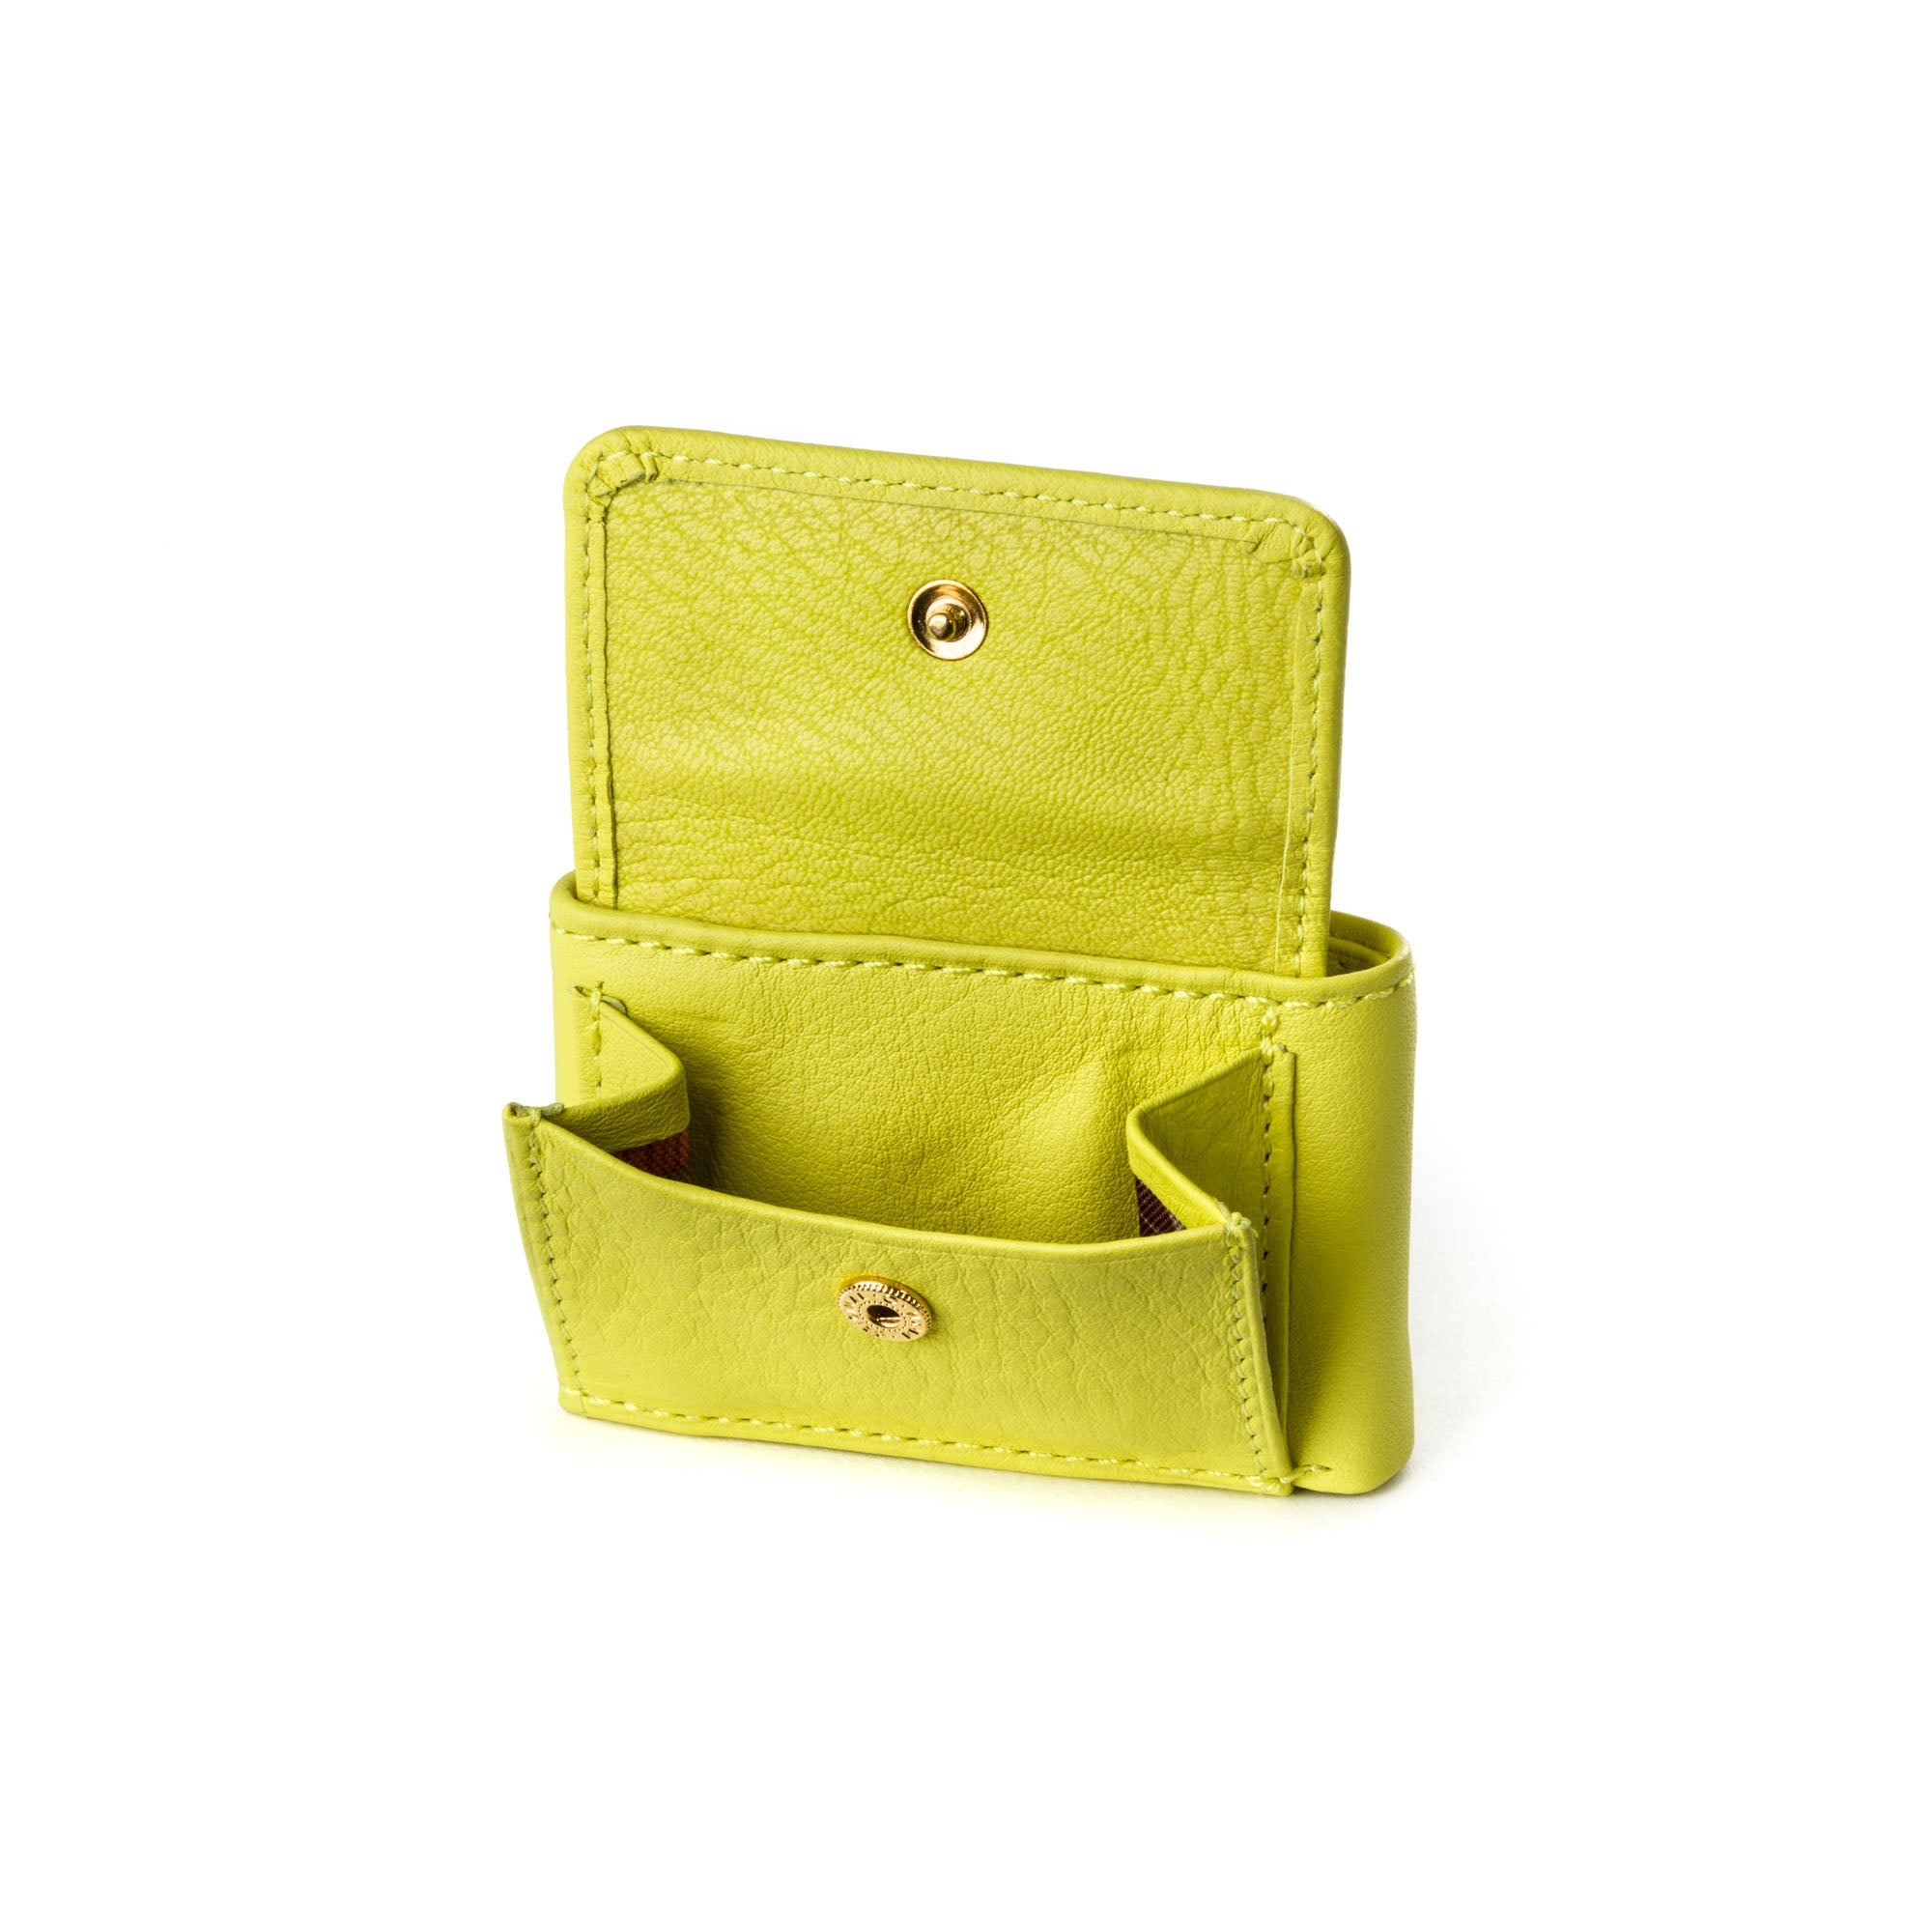 Nuvola Pelle Leather Coin Purse